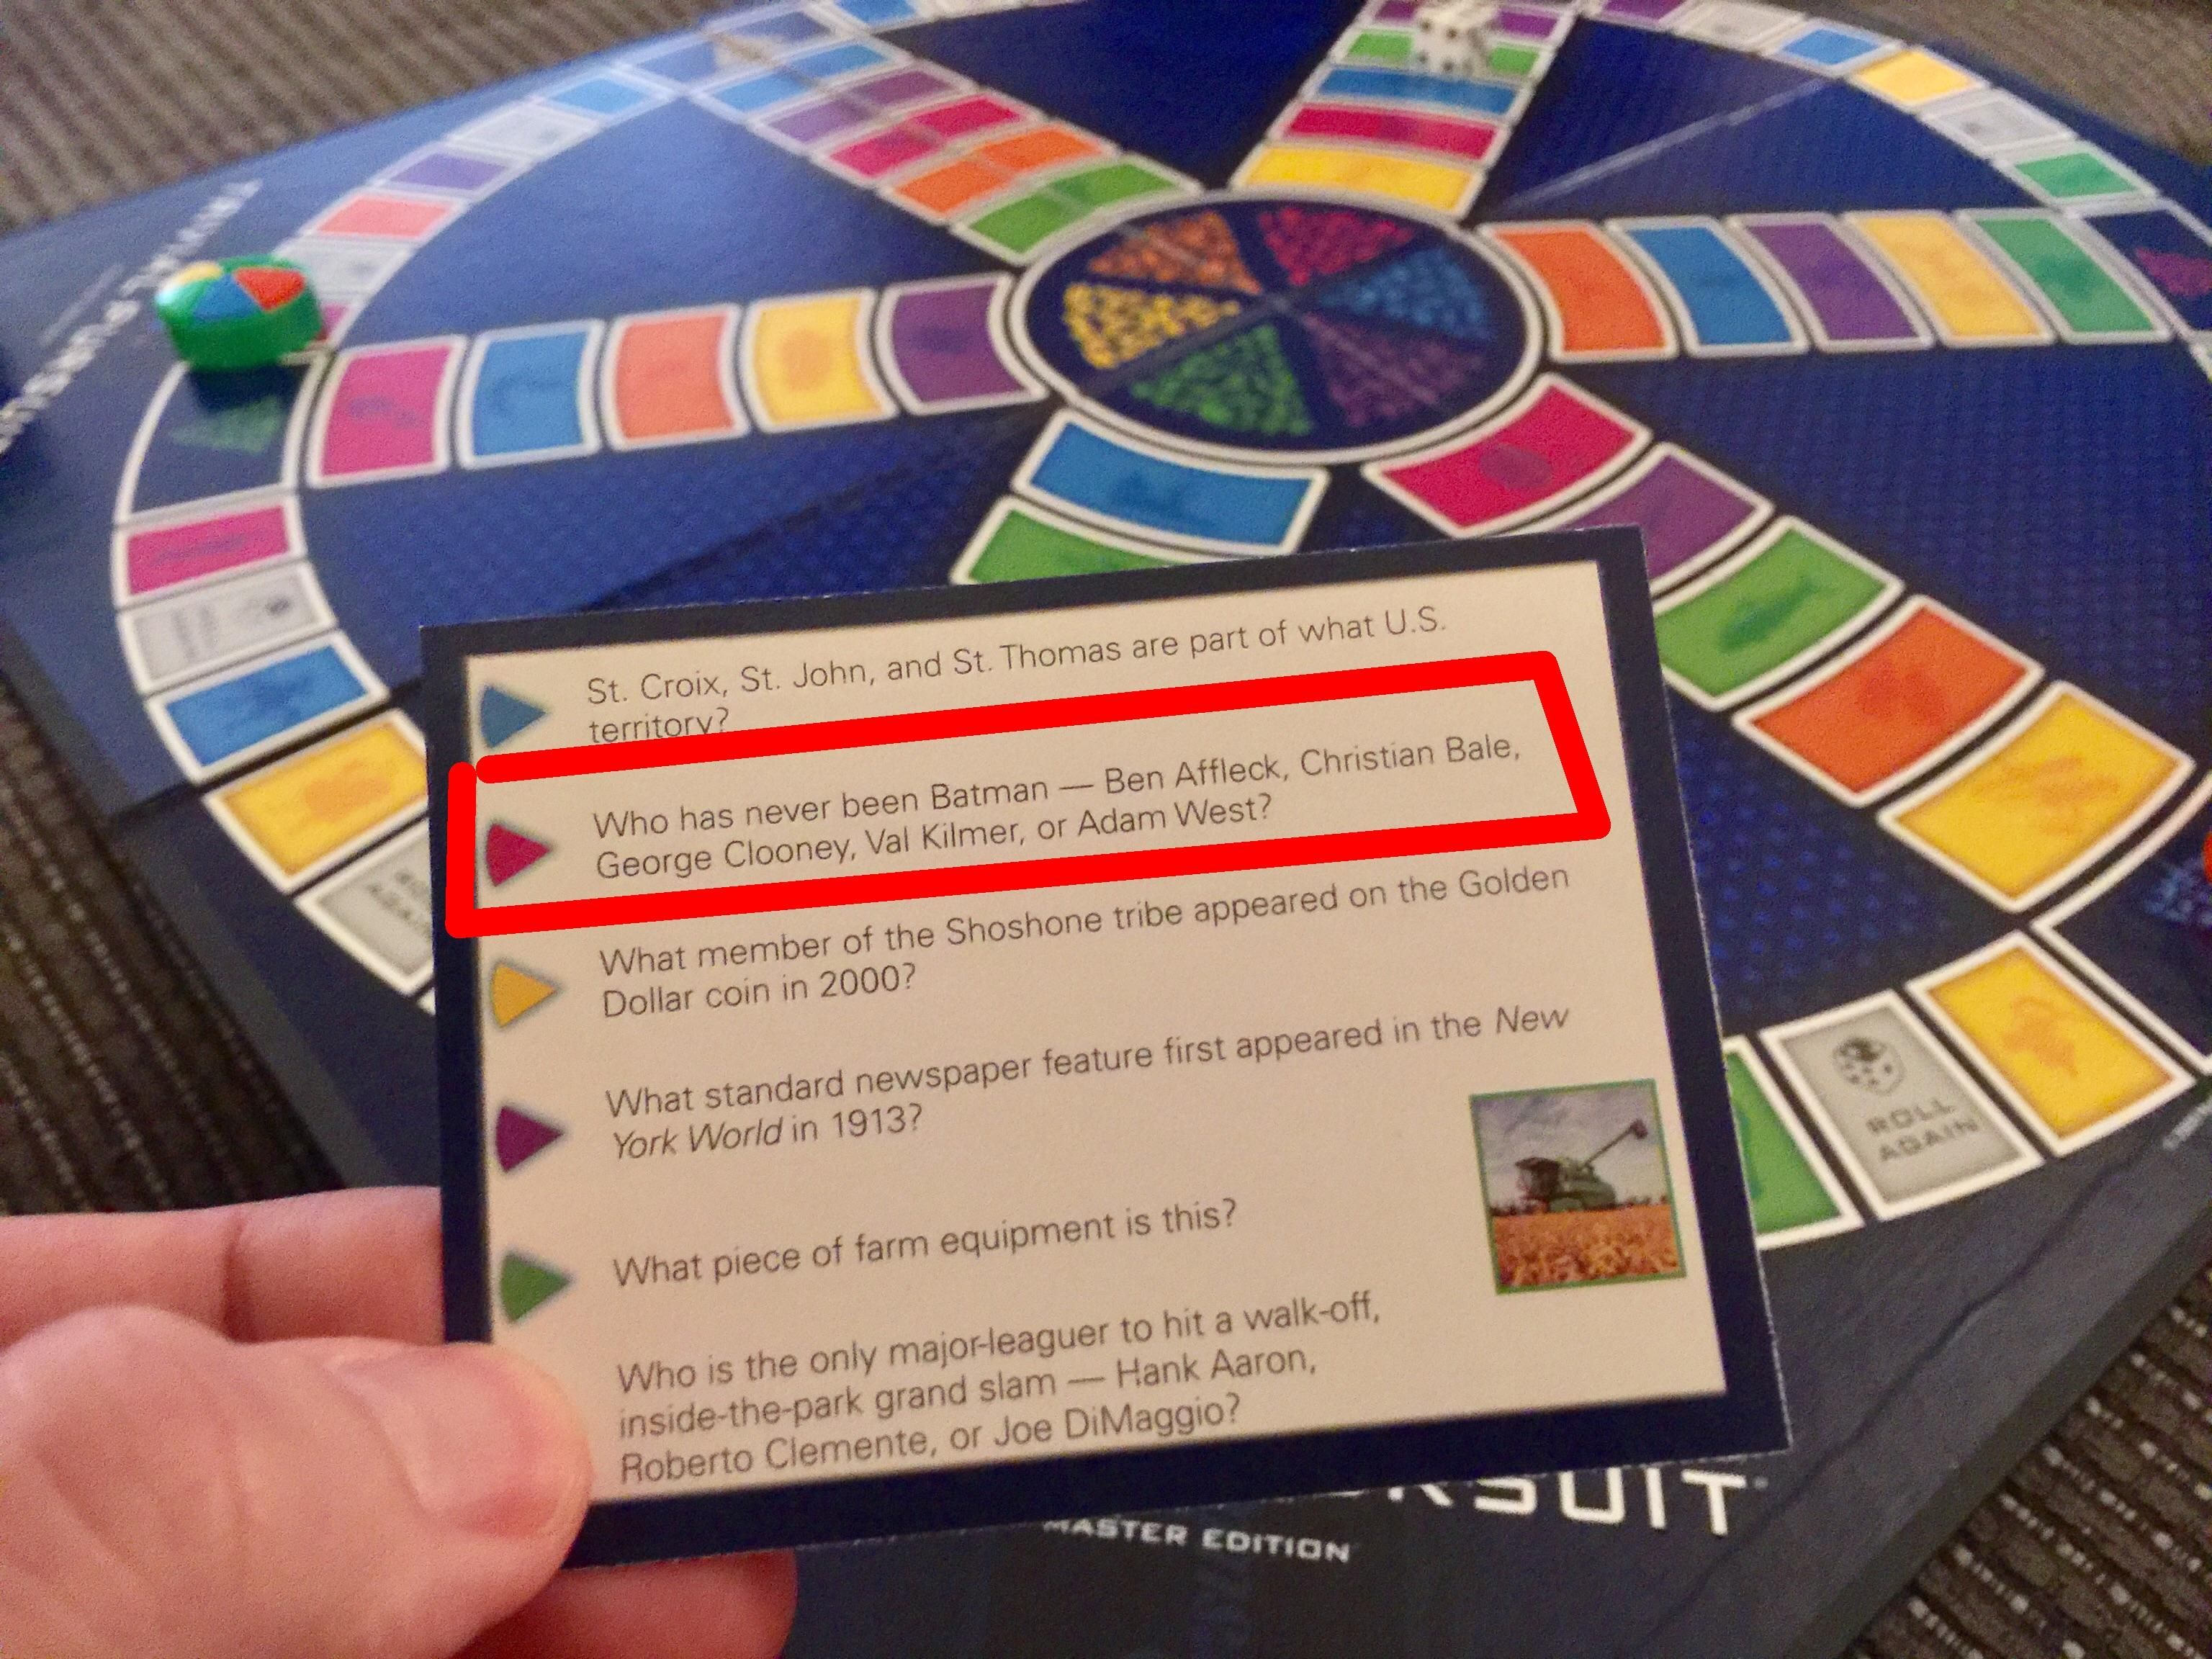 My Trivial Pursuit question is outdated.